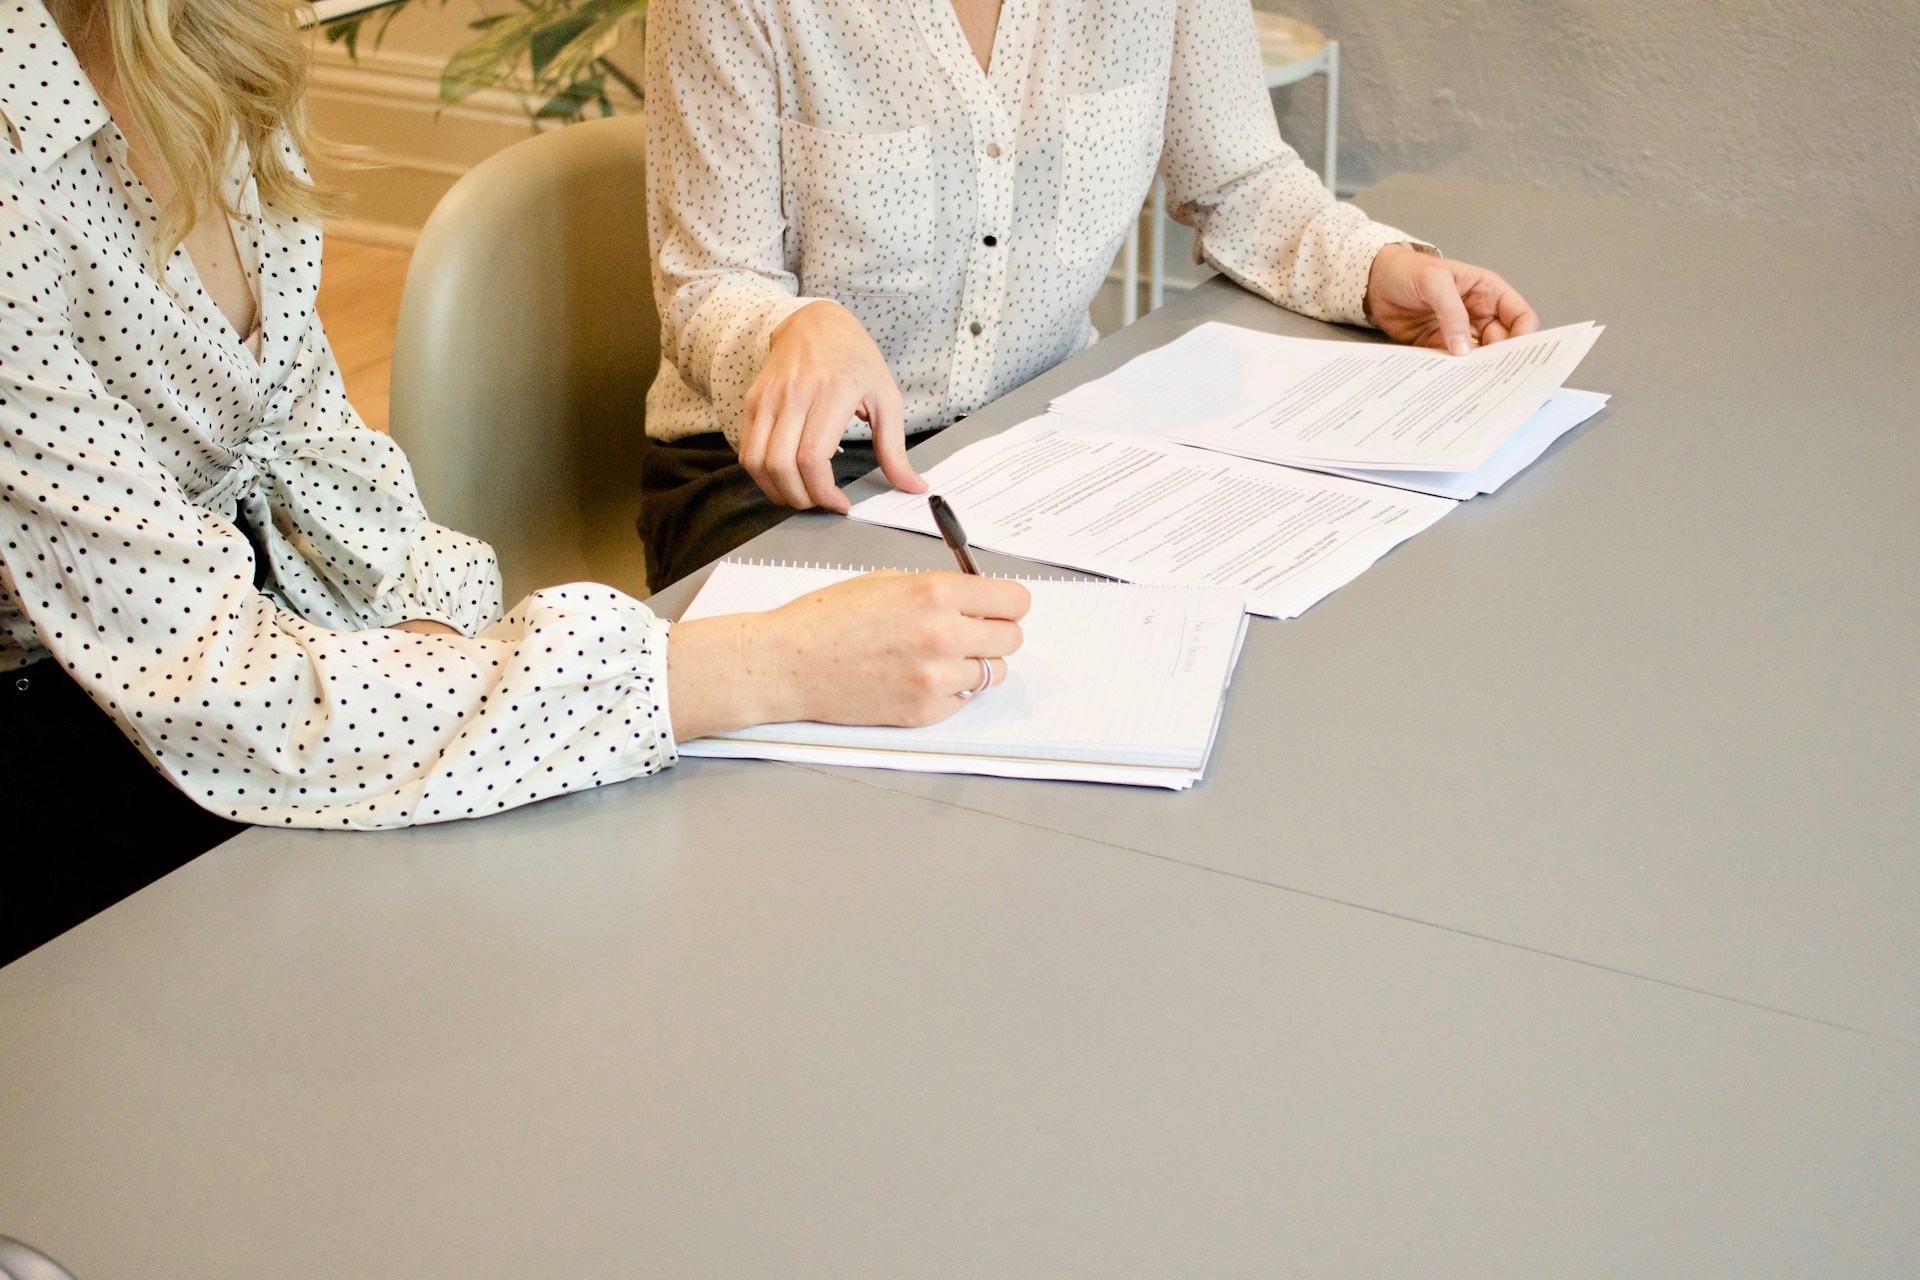 A woman signing a freelancer contract while another woman helps her.